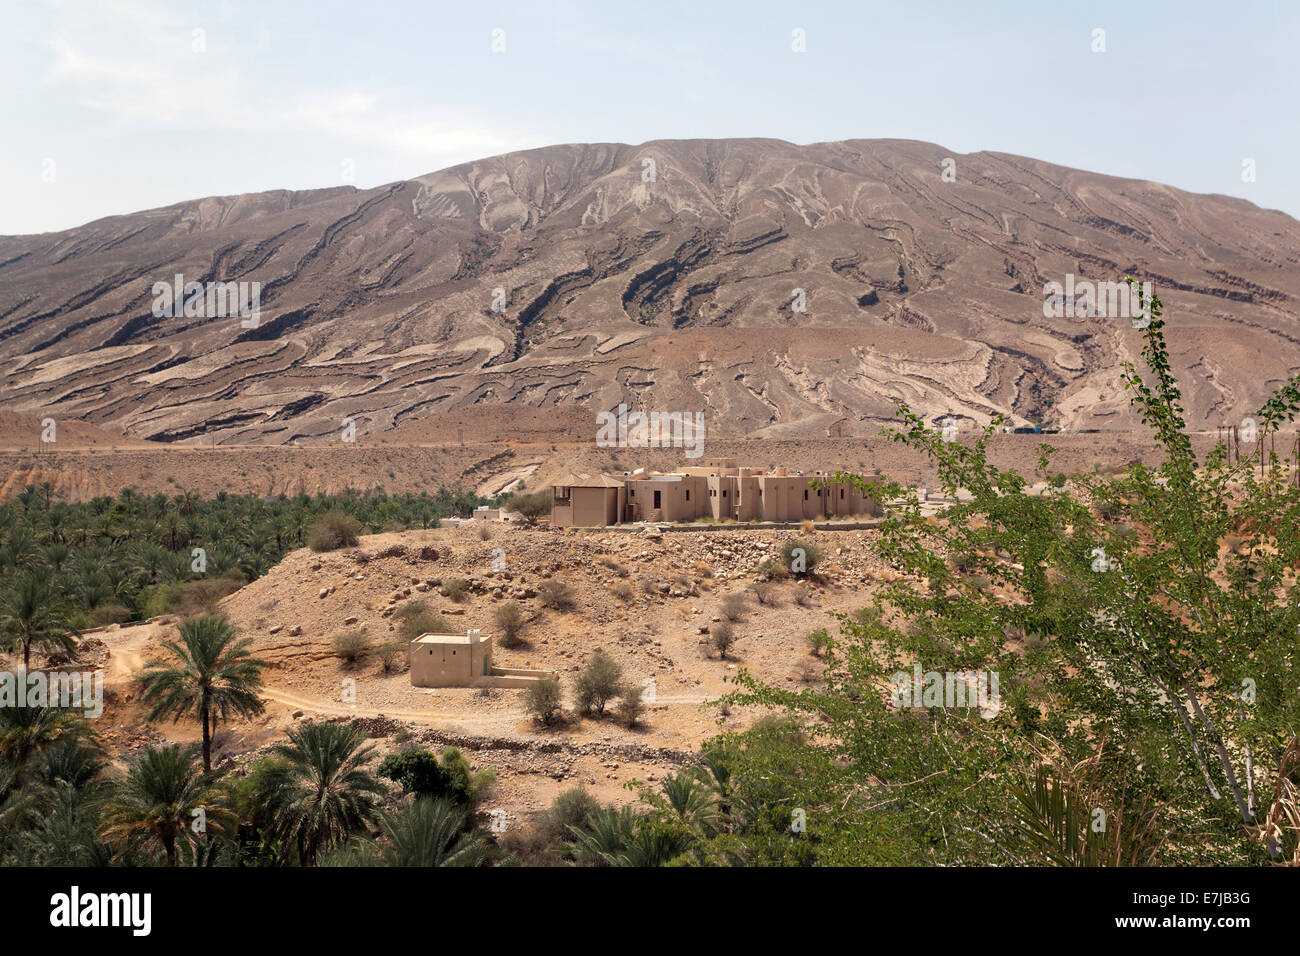 Hill with deep cuts from erosion, settlement, date palms, Sur, Ash Sharqiyah province, Sultanate of Oman, Arabian Peninsula Stock Photo